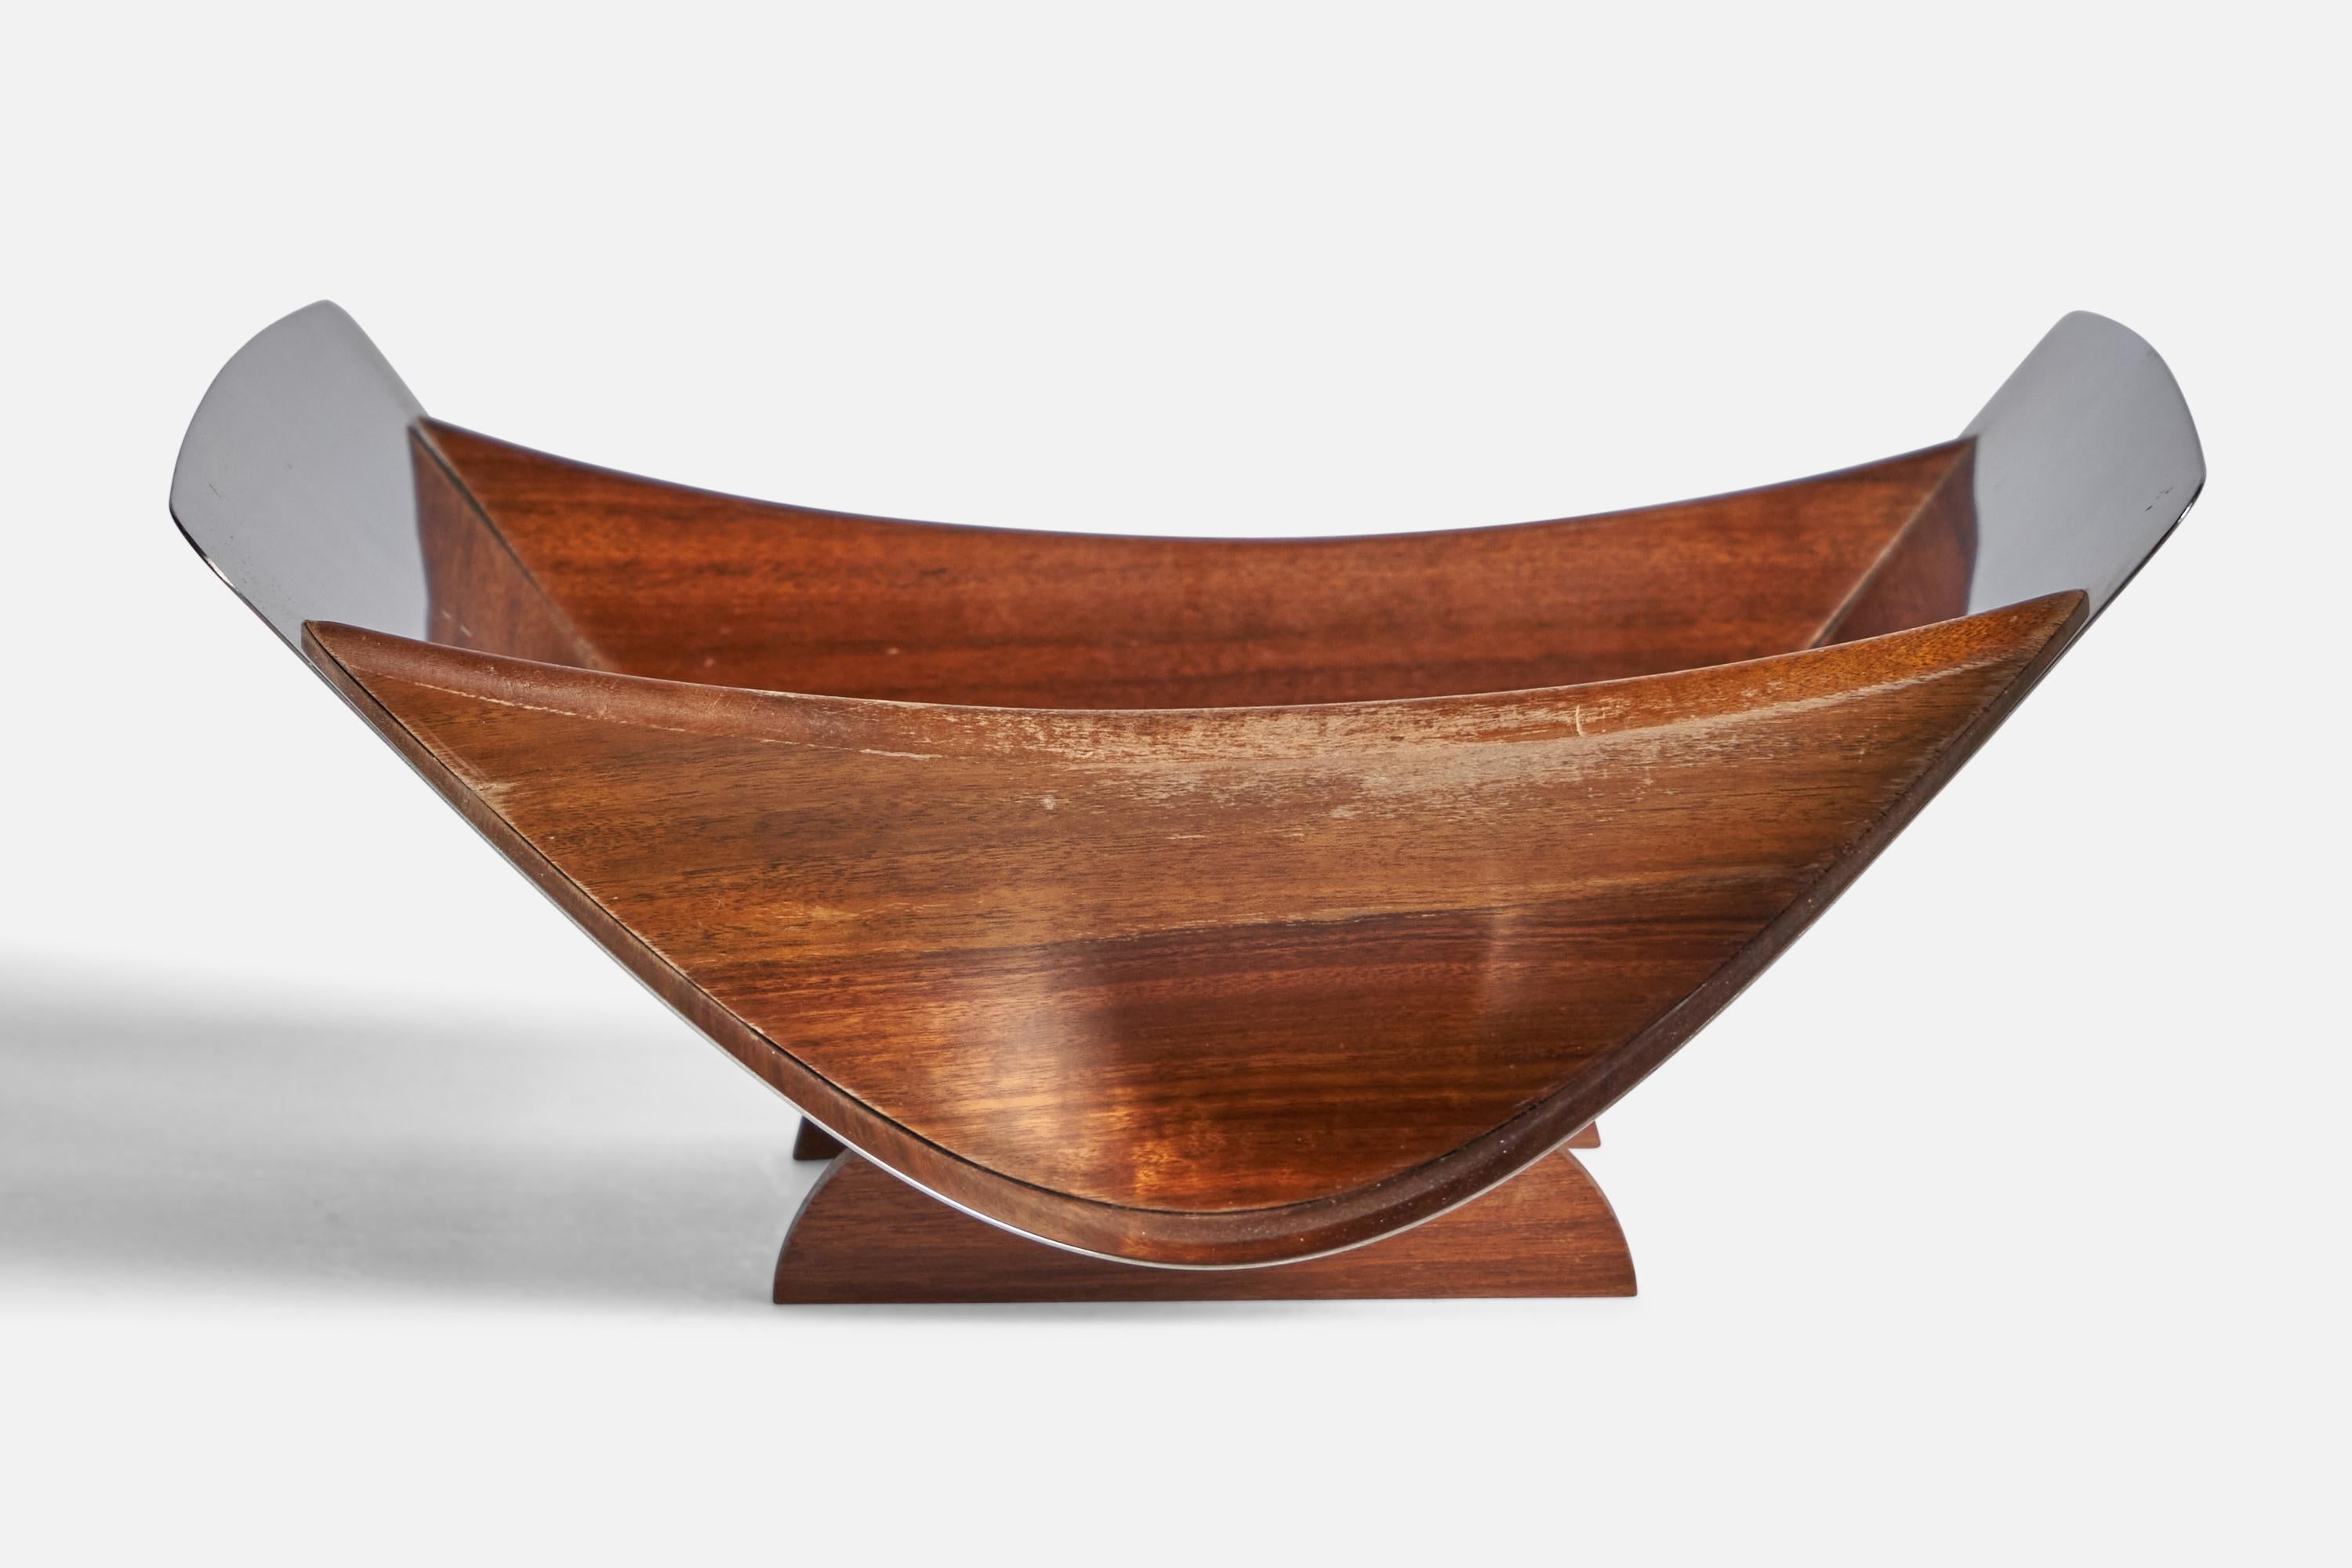 A teak and stainless steel bowl designed and produced in Denmark, 1950s.